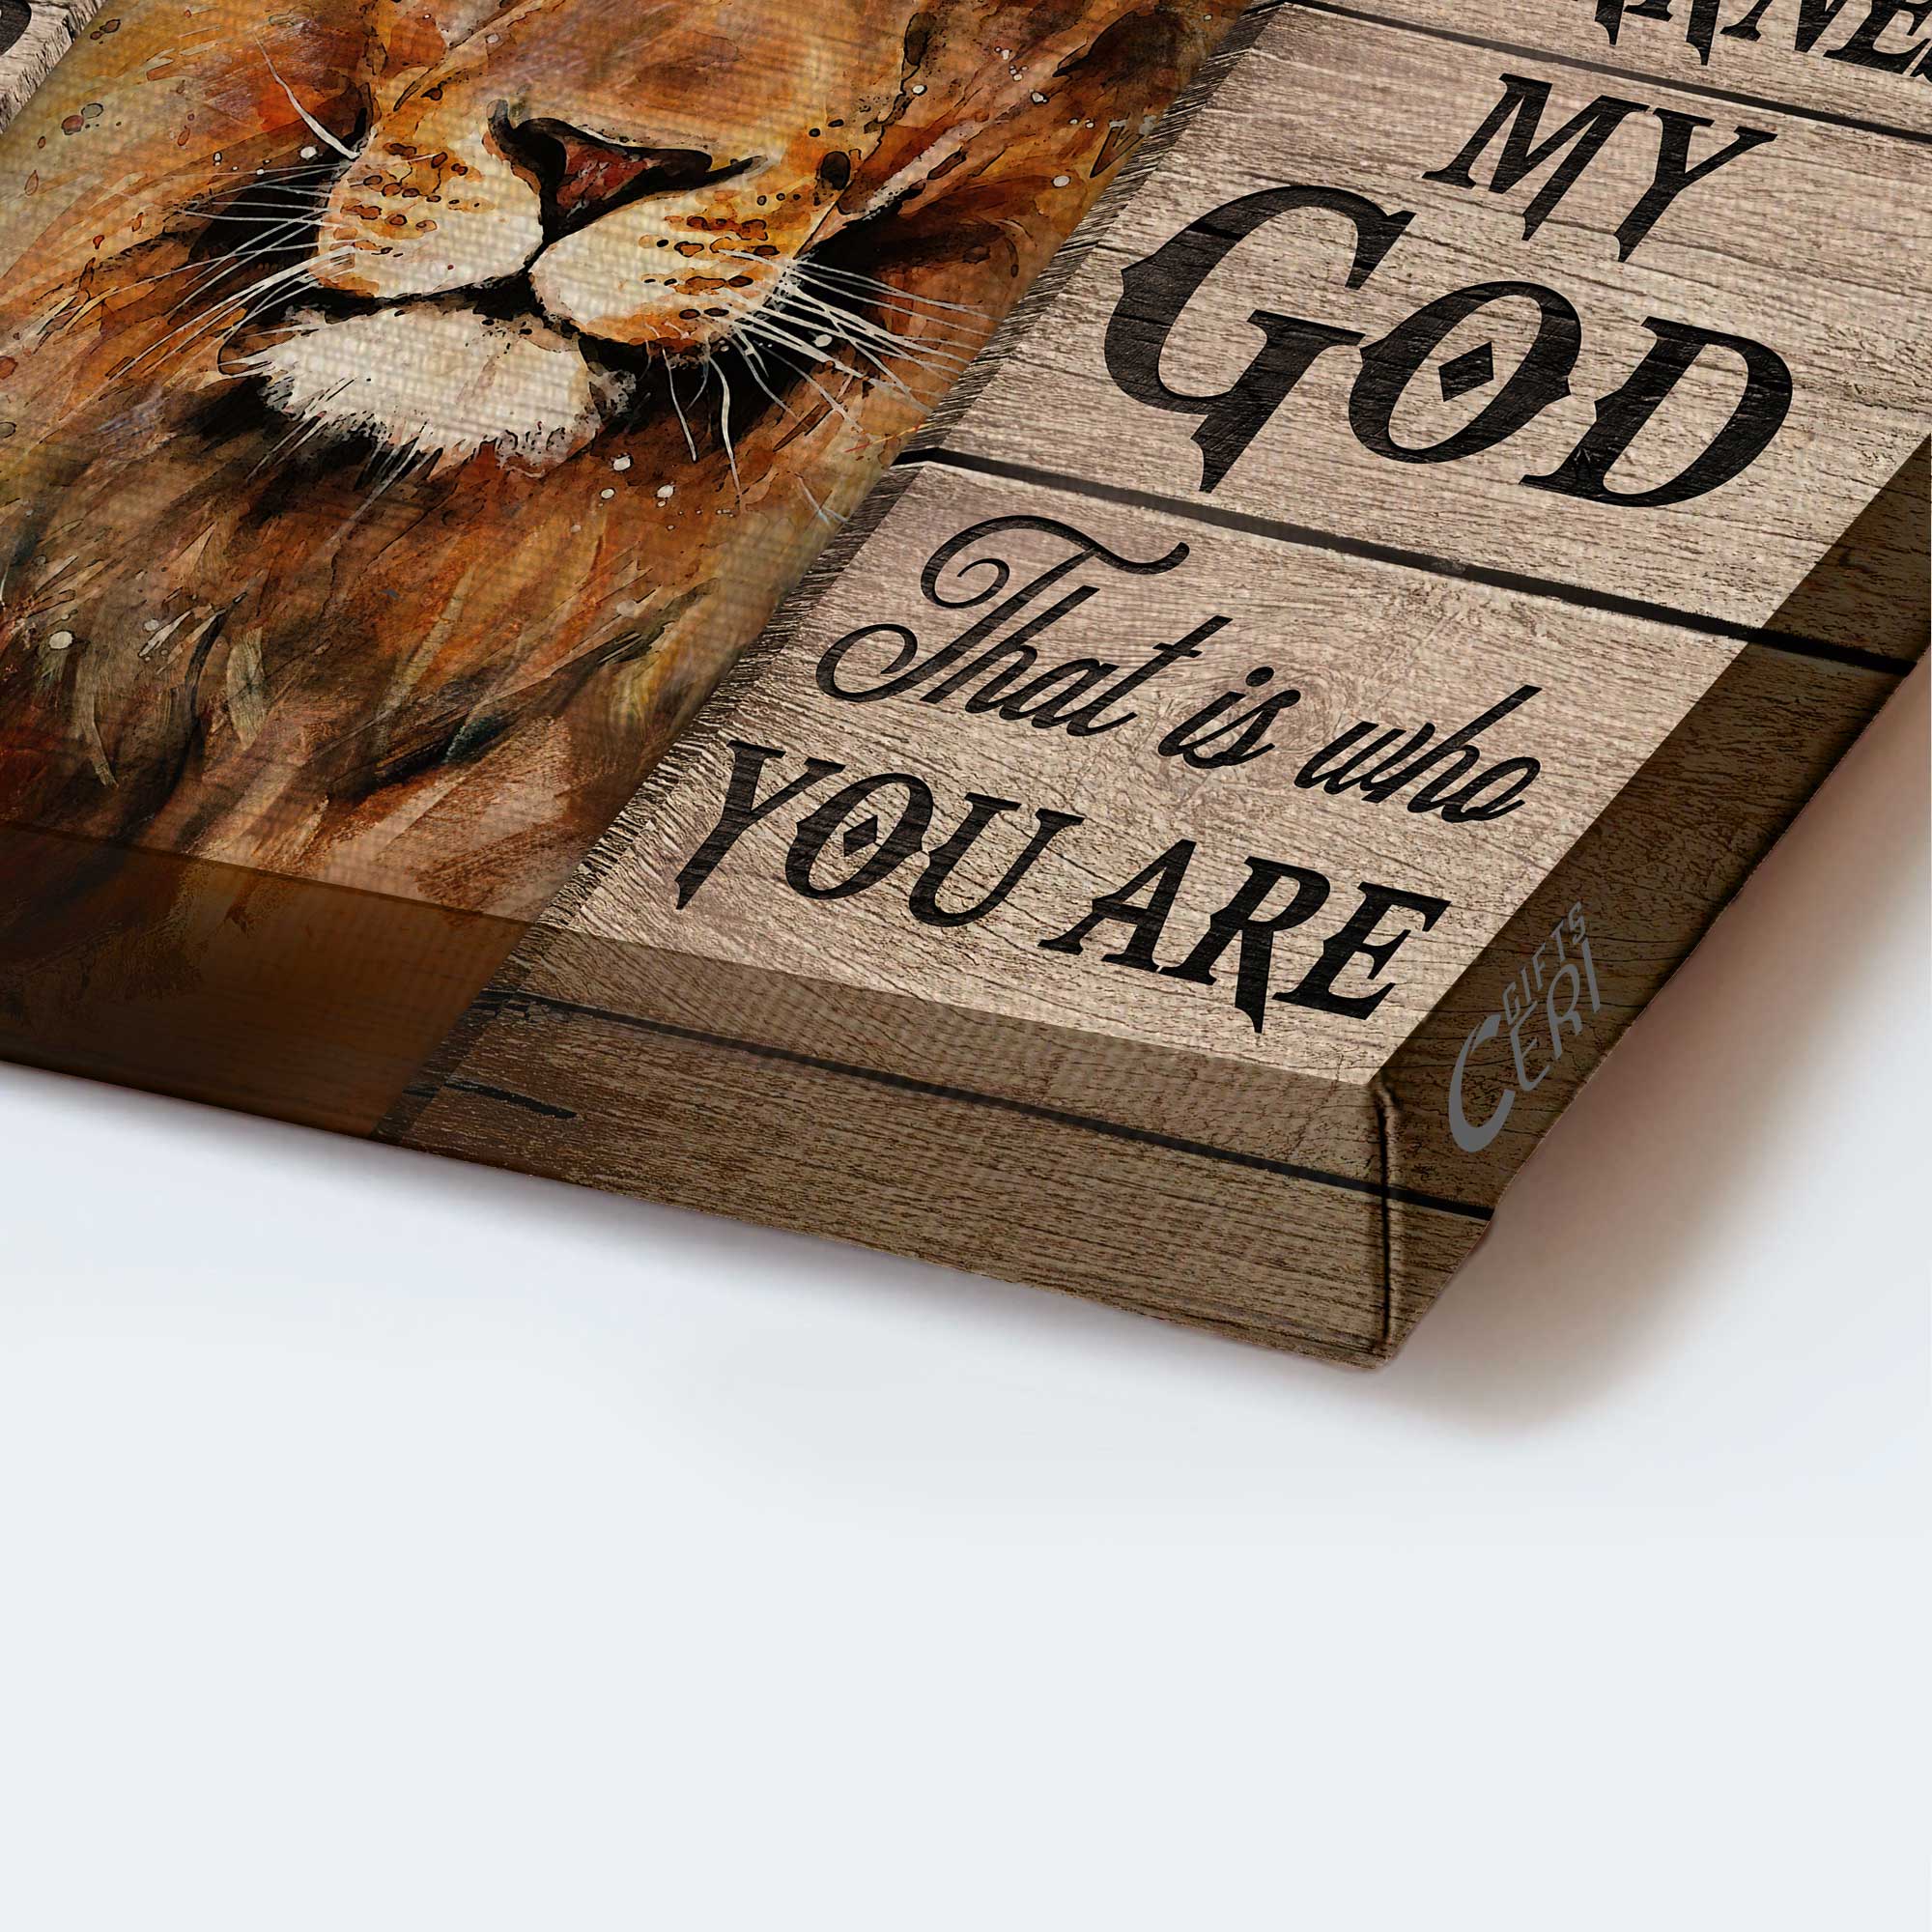 Way Maker Lyrics Sign, Christian Decor, Wooden Sign, Jesus Sign, Miracle Worker, Promise Keeper, My God